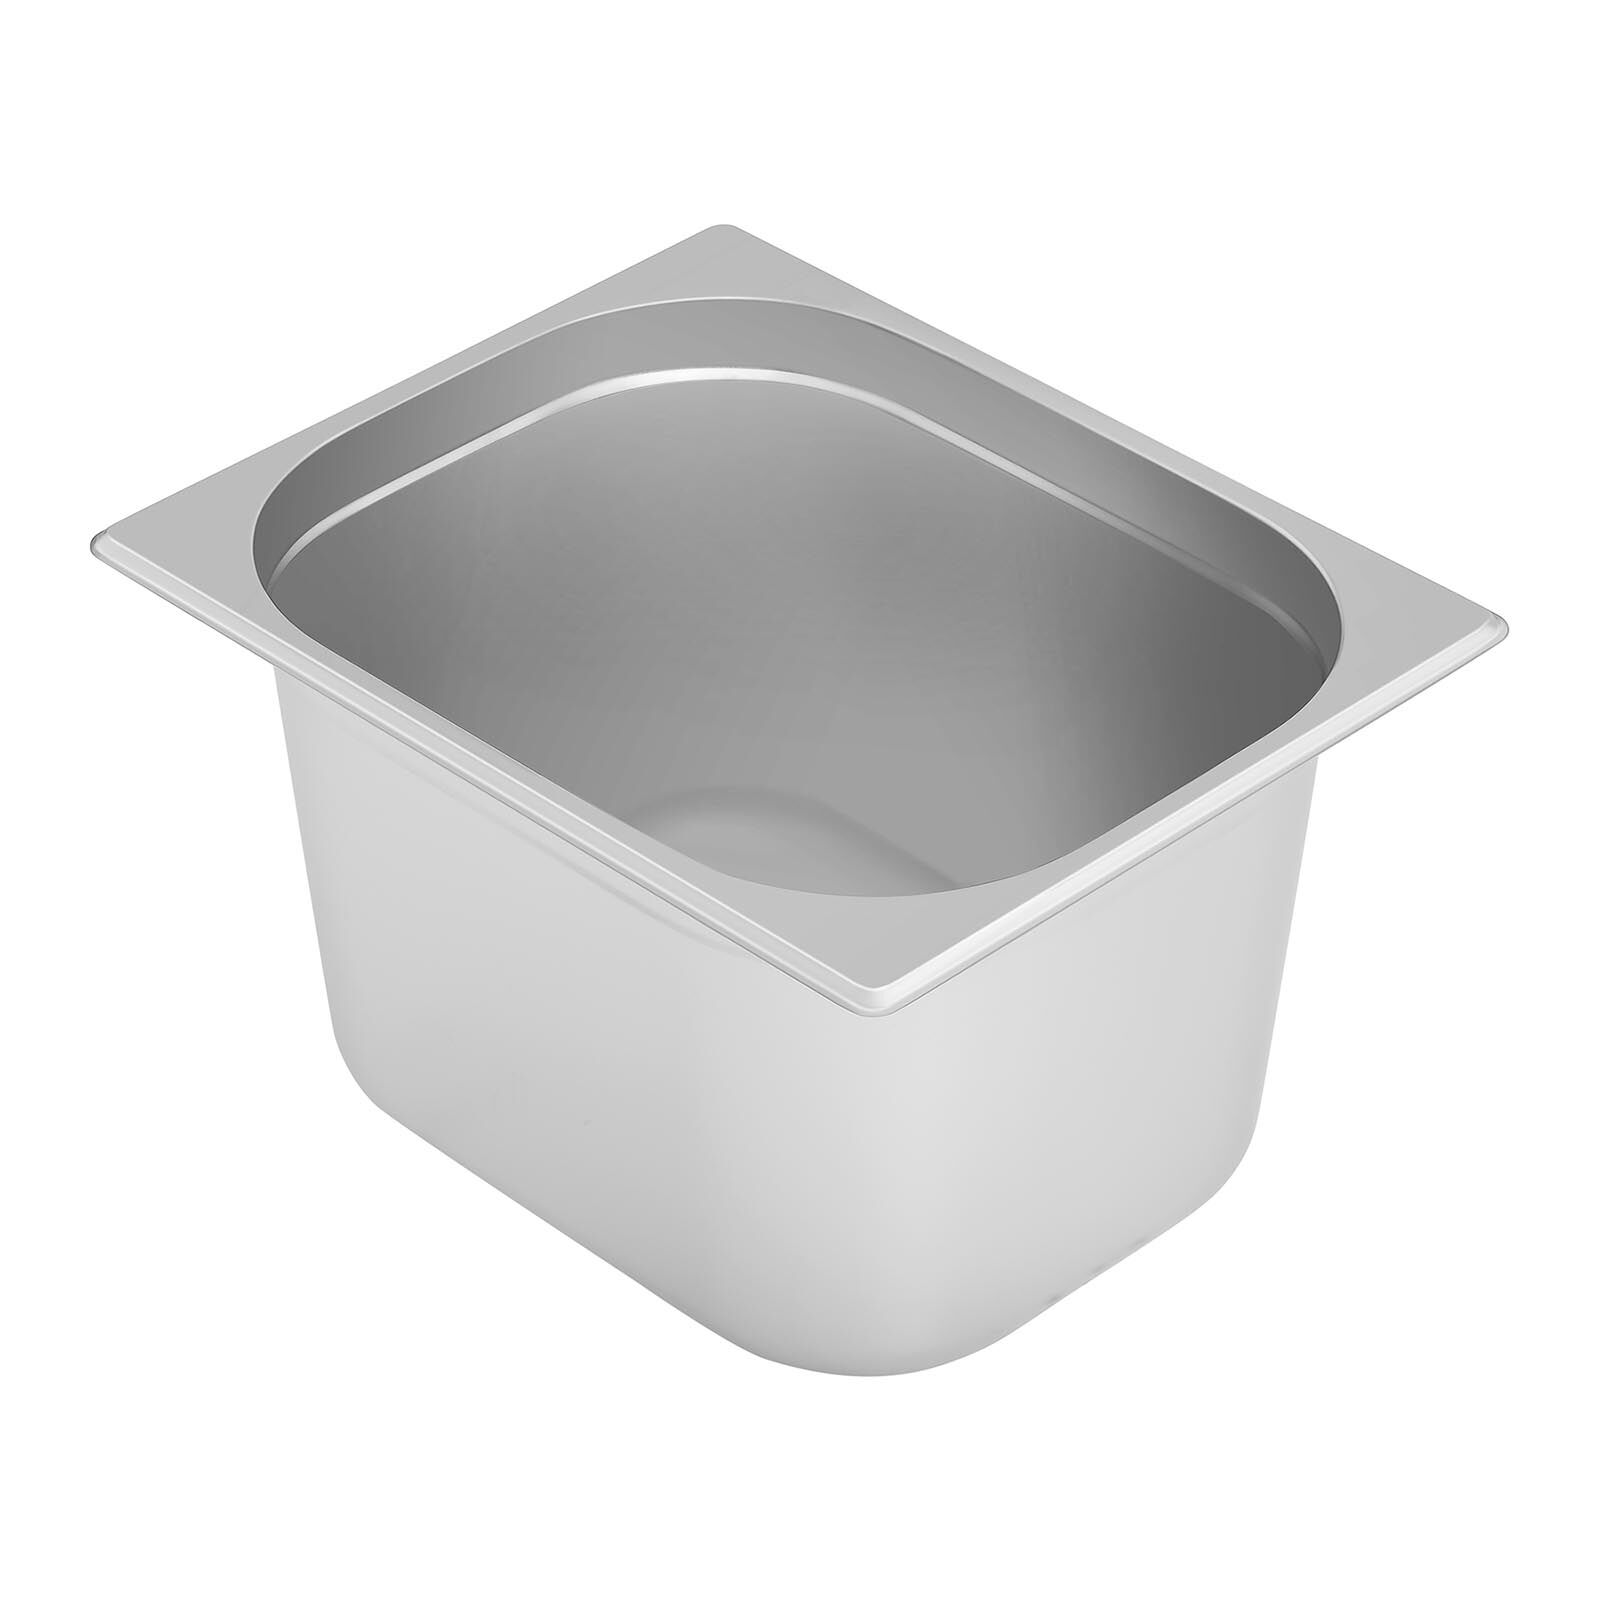 Royal Catering Gastronorm Tray - 1/2 - 200 mm RCGN-1/2X200